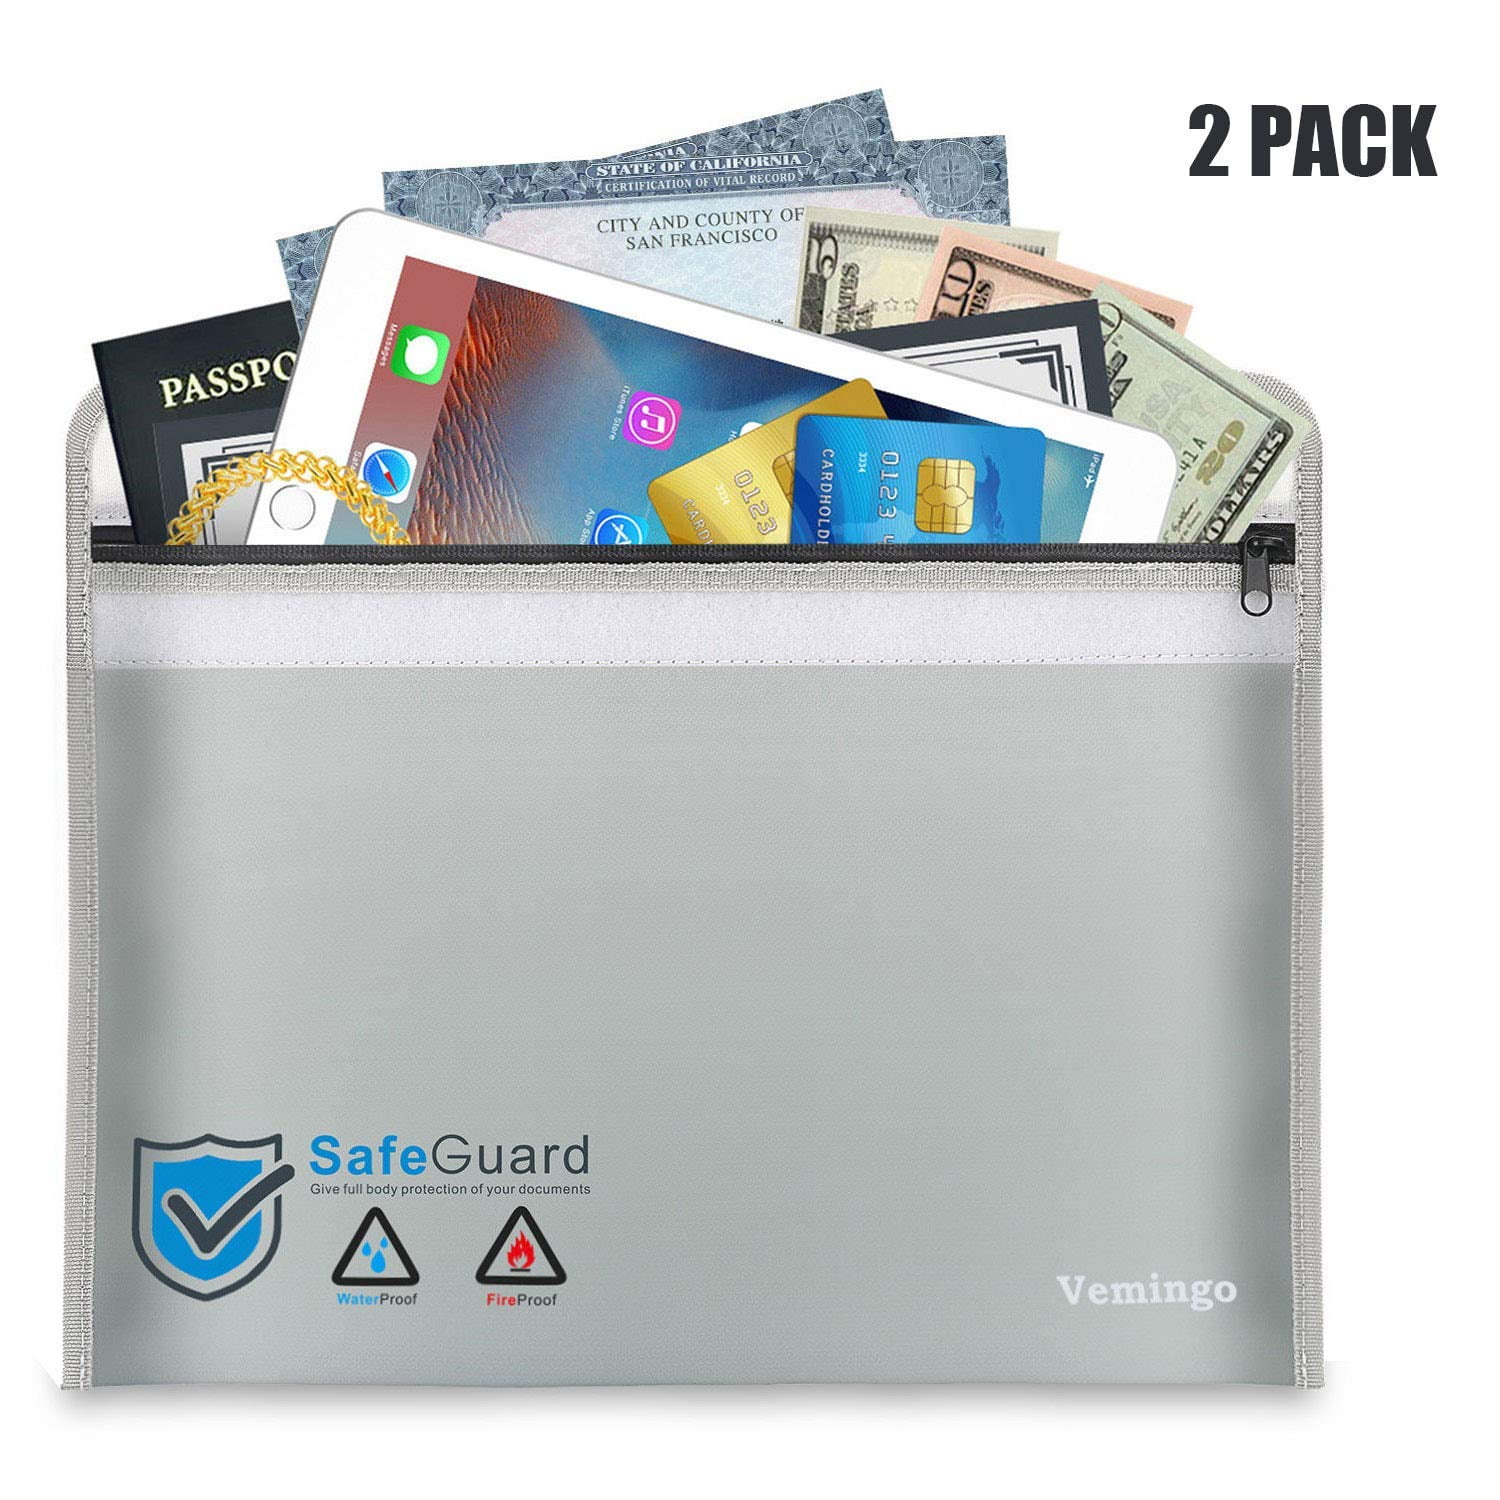 3 Pcs Set Portable Storage for Money Waterproof and Fire-Resistant Silicone Coated Fiberglass Non-Itchy Layering Fireproof Bags and Document Holders Passports or Electronics 